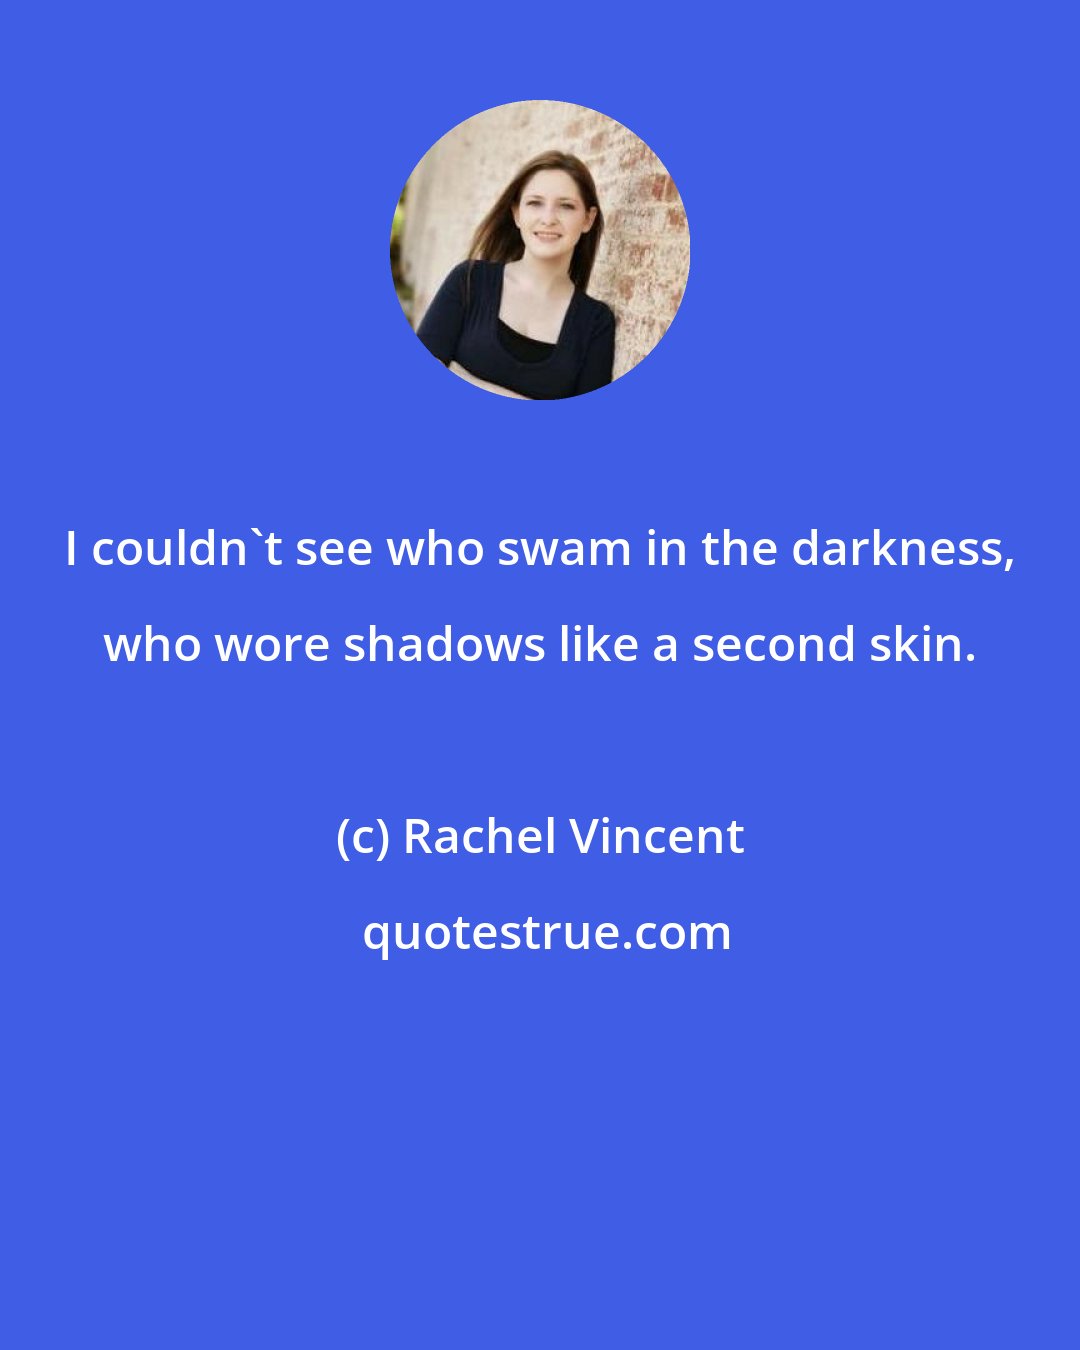 Rachel Vincent: I couldn't see who swam in the darkness, who wore shadows like a second skin.